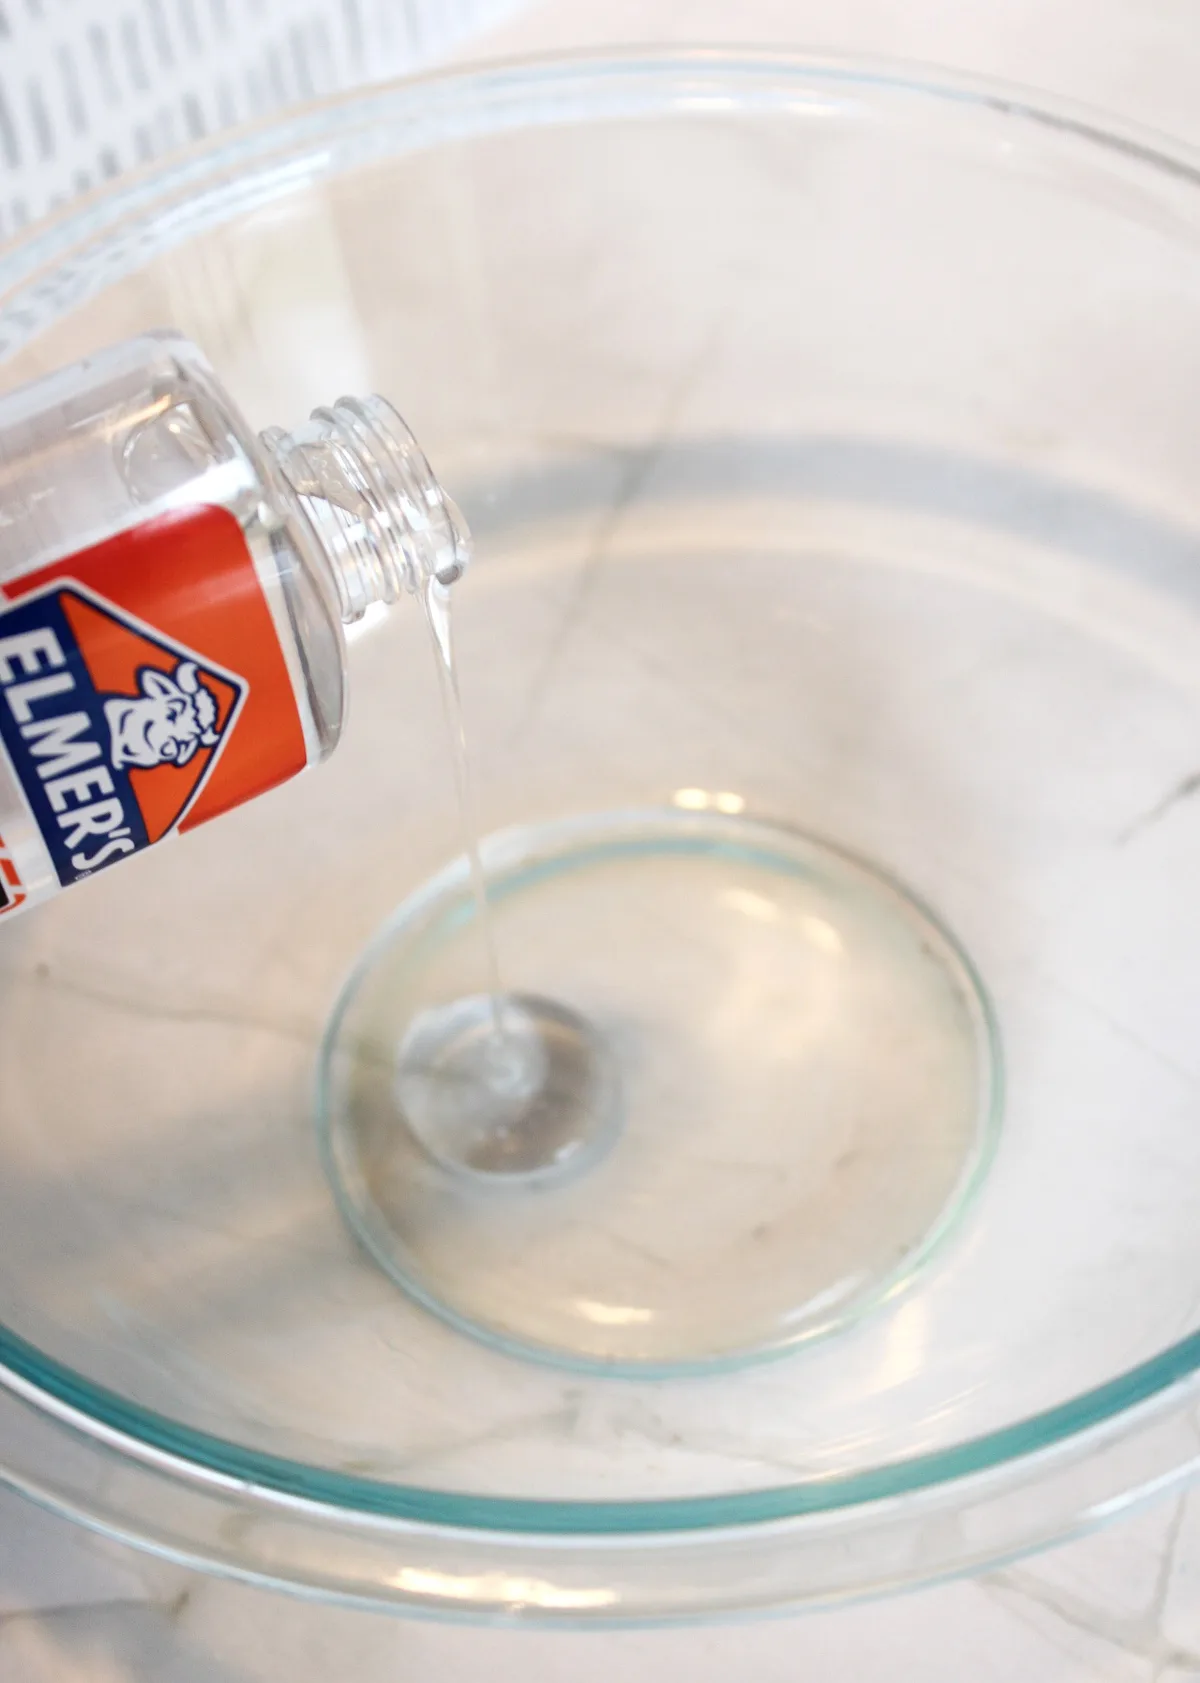 Adding clear glue to a glass bowl